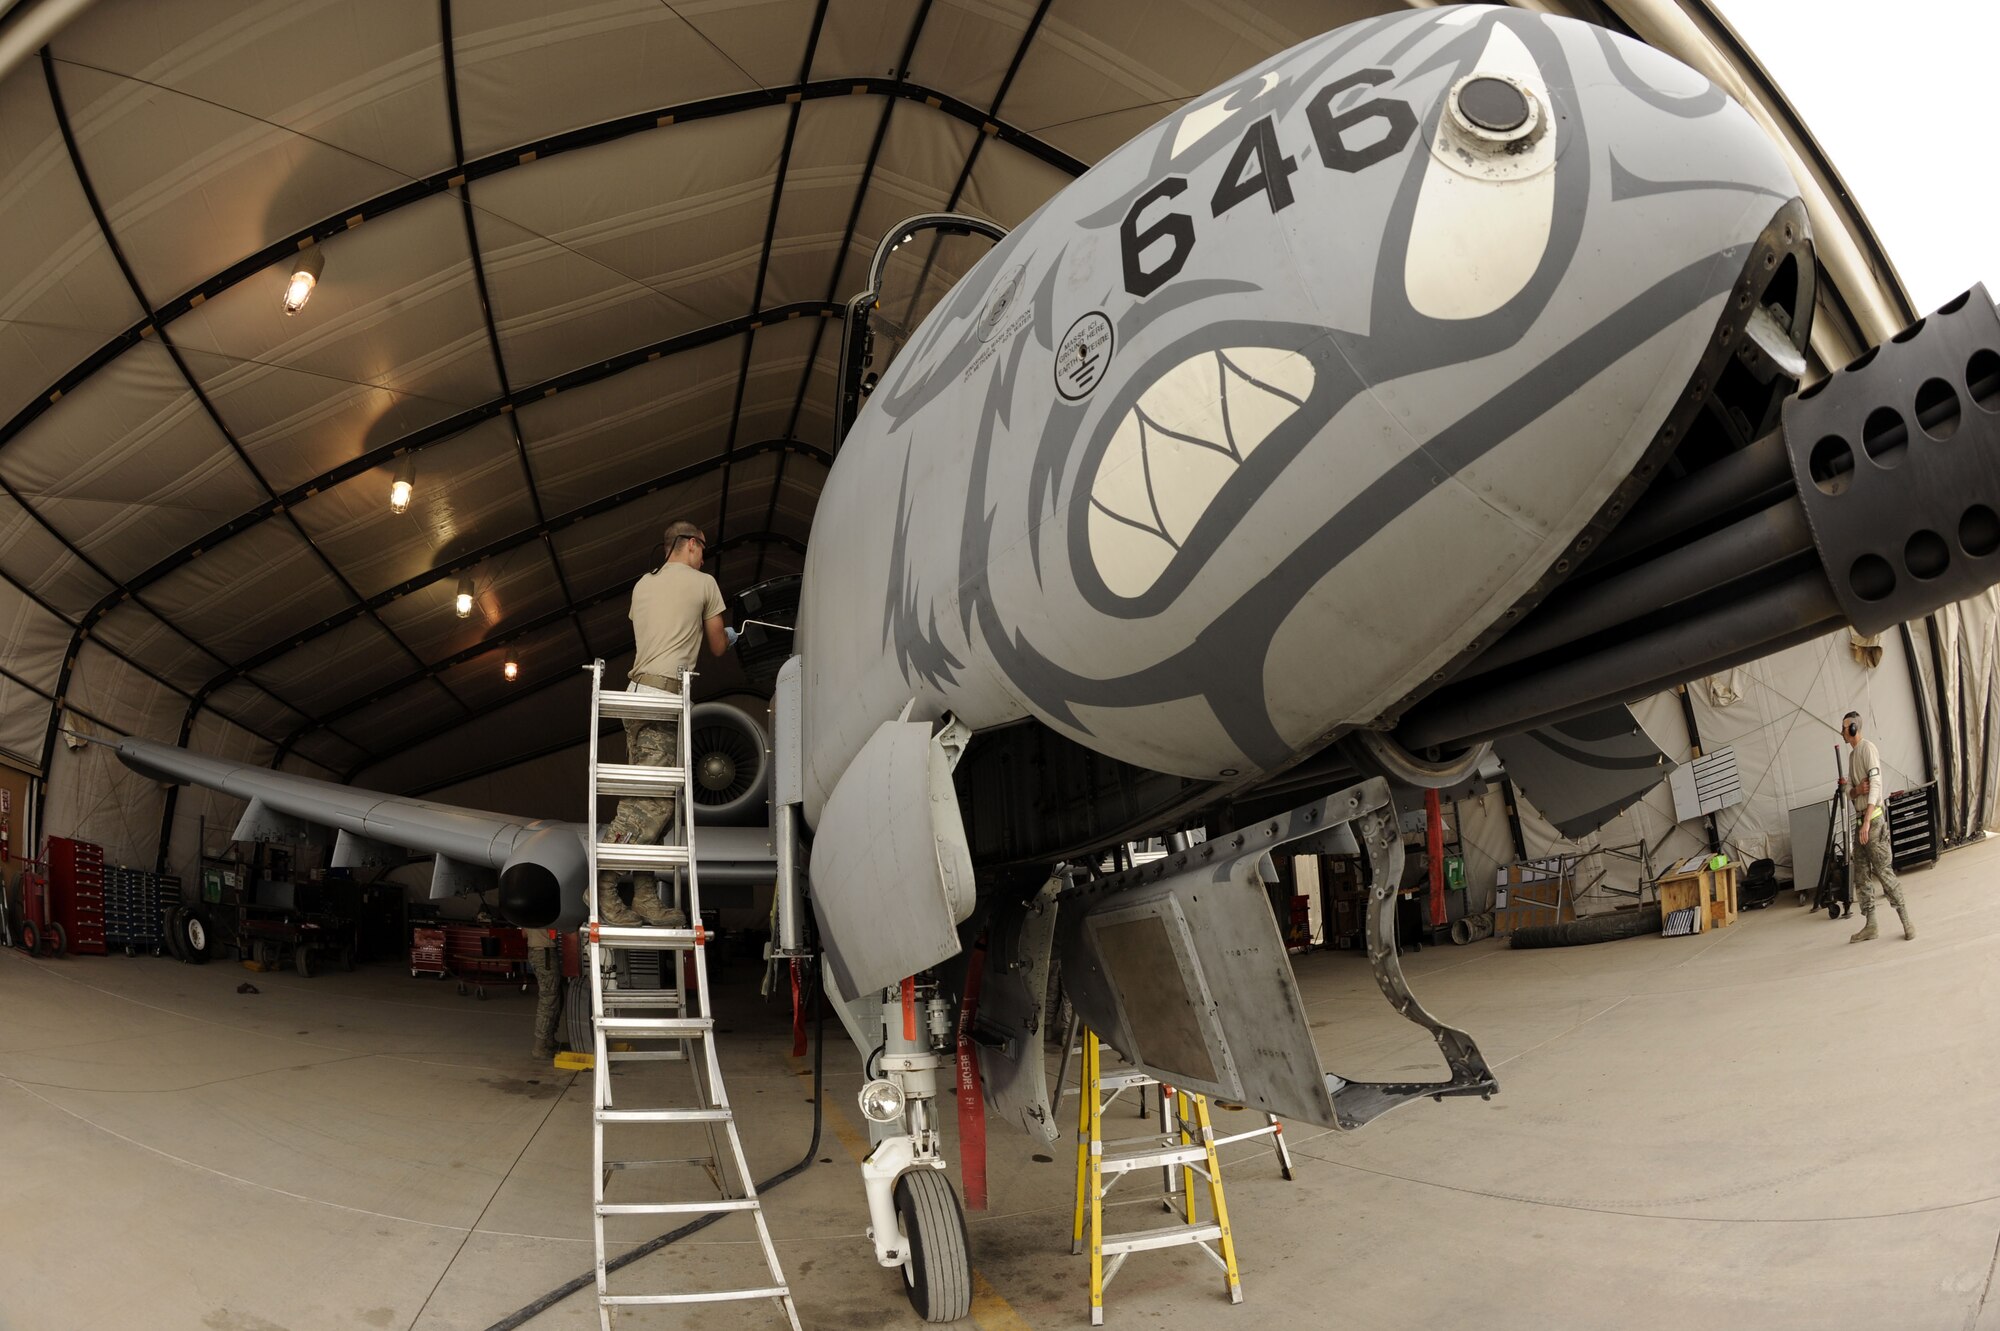 Airmen from the 104th Expeditionary Fighter Squadron, Air National Guard, Baltimore, Md., and 188th Wing, Fort Smith, Ark., will work and maintain the A-10 Thunderbolt II for the next 120 days.  ch. Sgt. Lew Smith, 451st Expeditionary Maintenance Squadron, conducts a phase inspection of an A-10 Thunderbolt II here Feb. 24.  Sergeant Smith is assigned to the 175th Maryland National Guard.  (U.S. Air Force photo by Senior Airman Nancy Hooks/Released)